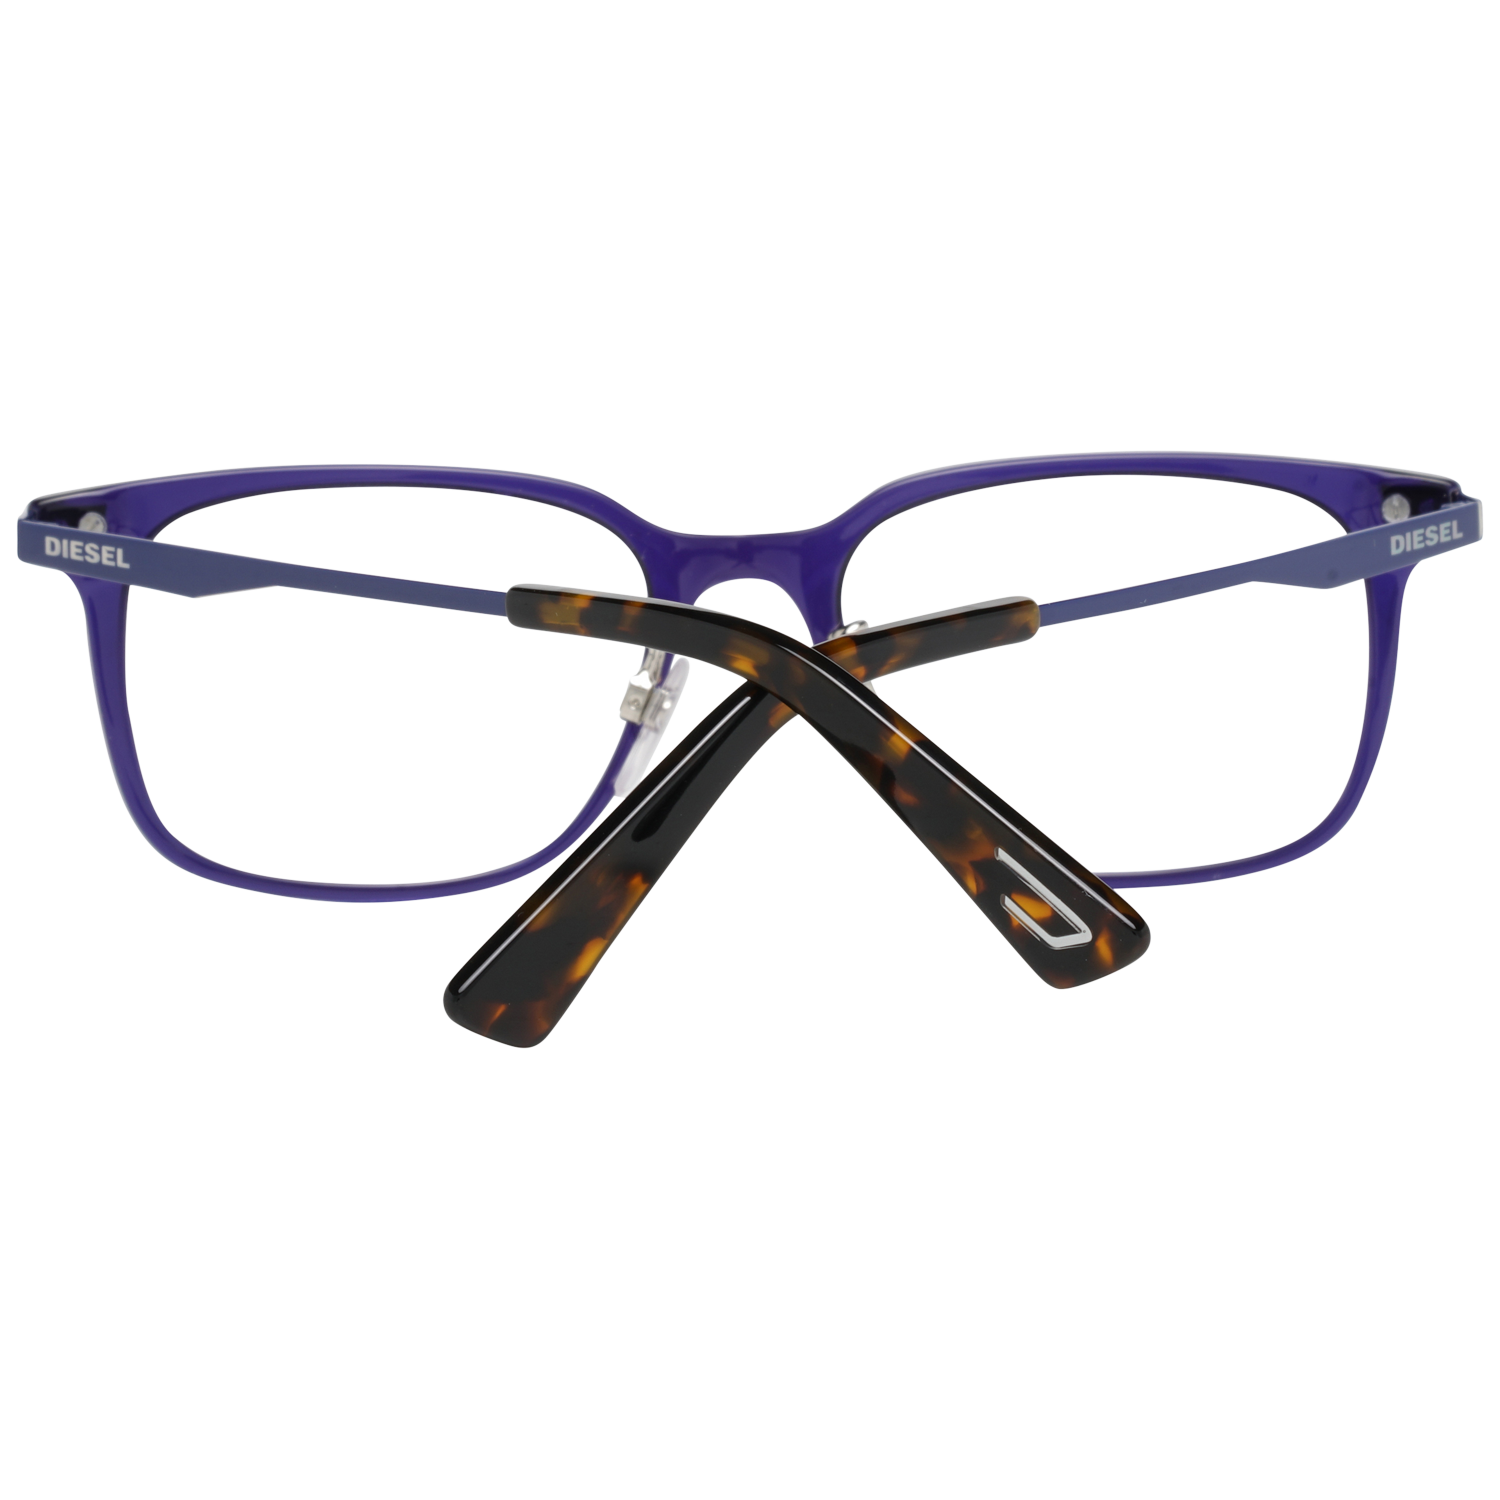 GenderMenMain colorBlueFrame colorBlueFrame materialMetal & PlasticSize53-18-145Lenses width53mmLenses heigth40mmBridge length18mmFrame width140mmTemple length145mmShipment includesCase, Cleaning clothStyleFull-RimSpring hingeNoExtraNo extra